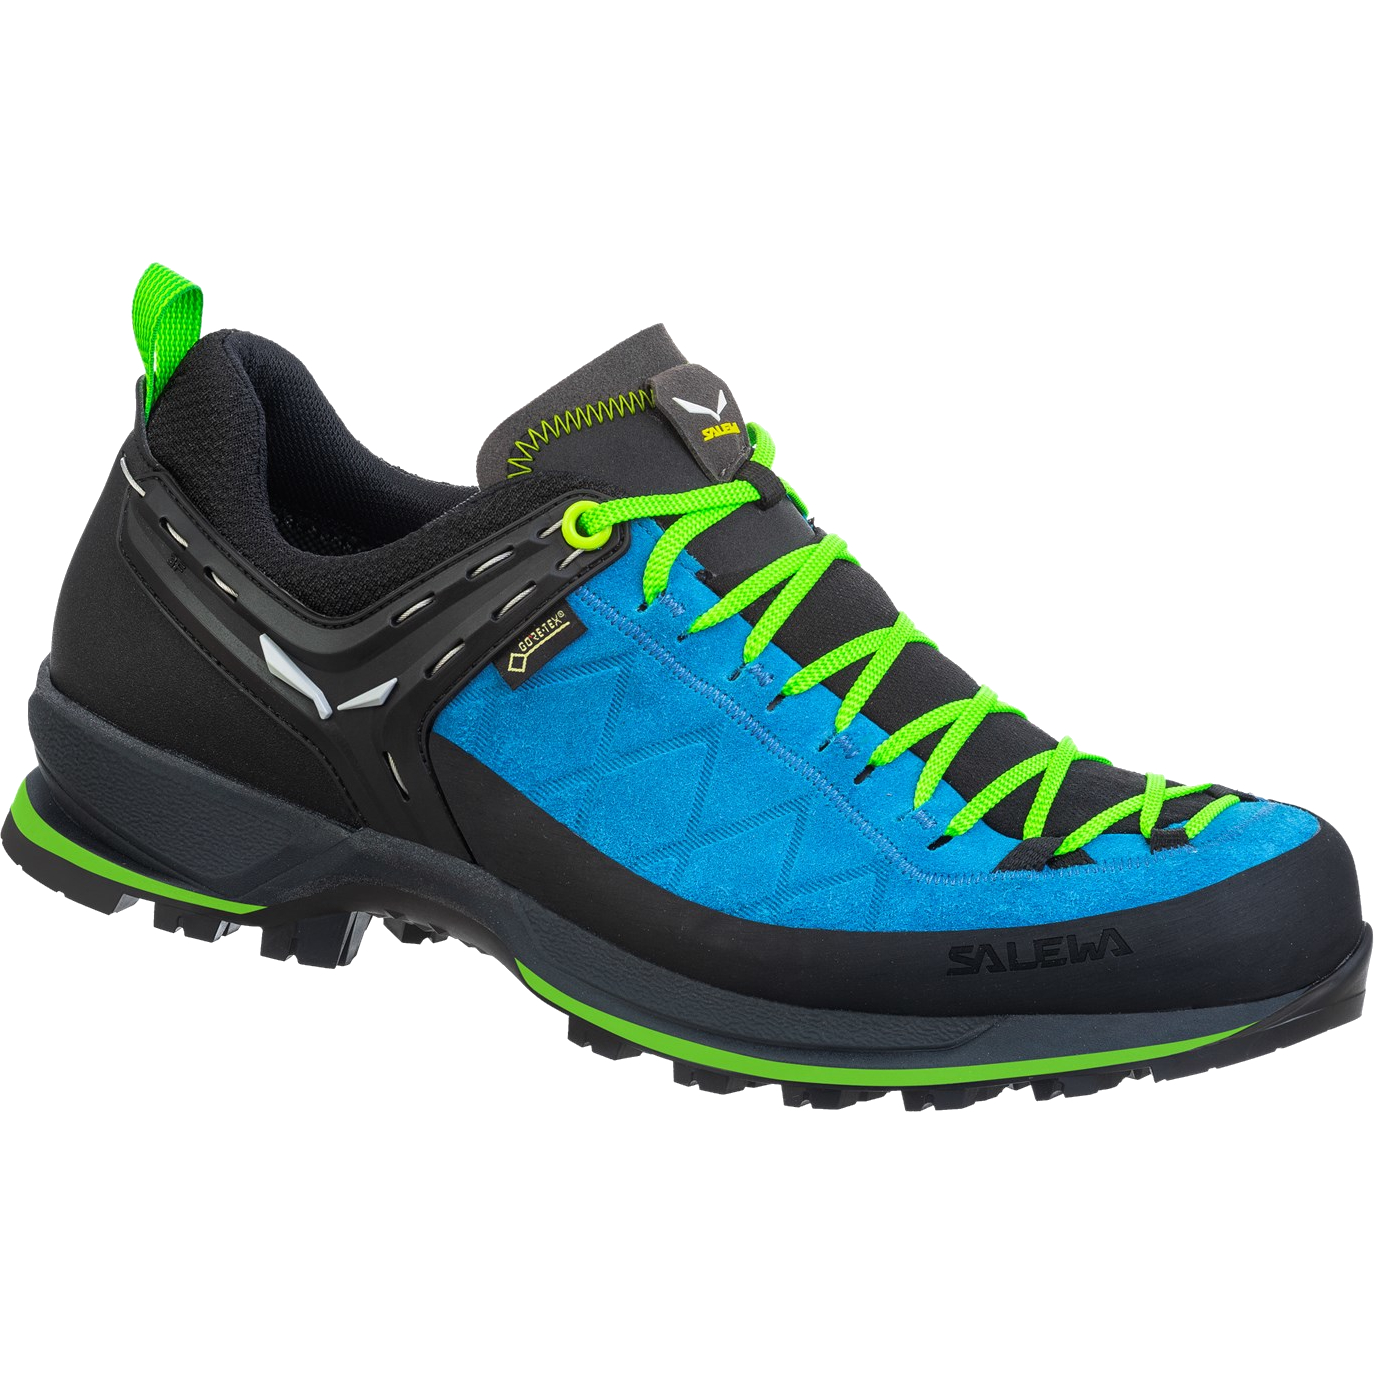 Picture of Salewa Mountain Trainer 2 GTX Hiking Shoes Men - blue danube/fluo green 8375